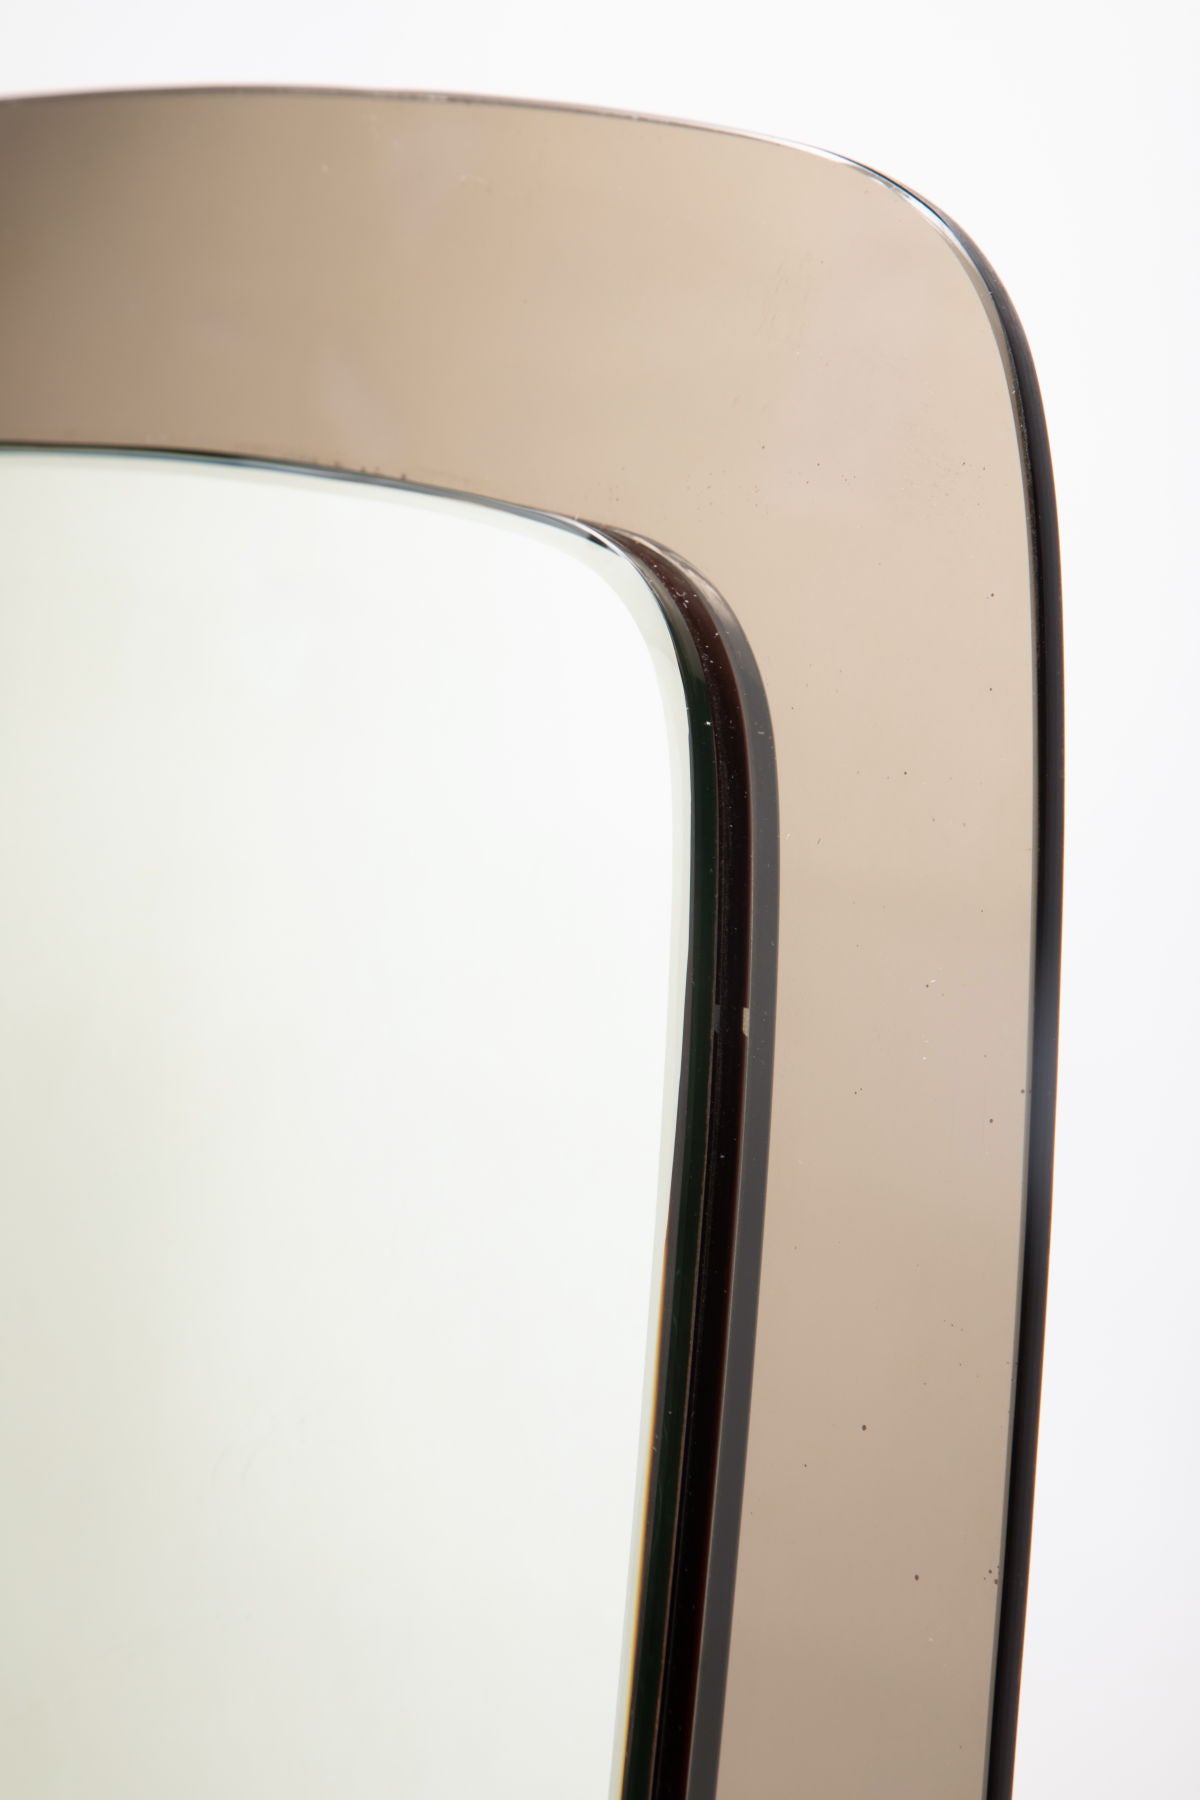 Smoked edge mirror from the 70s